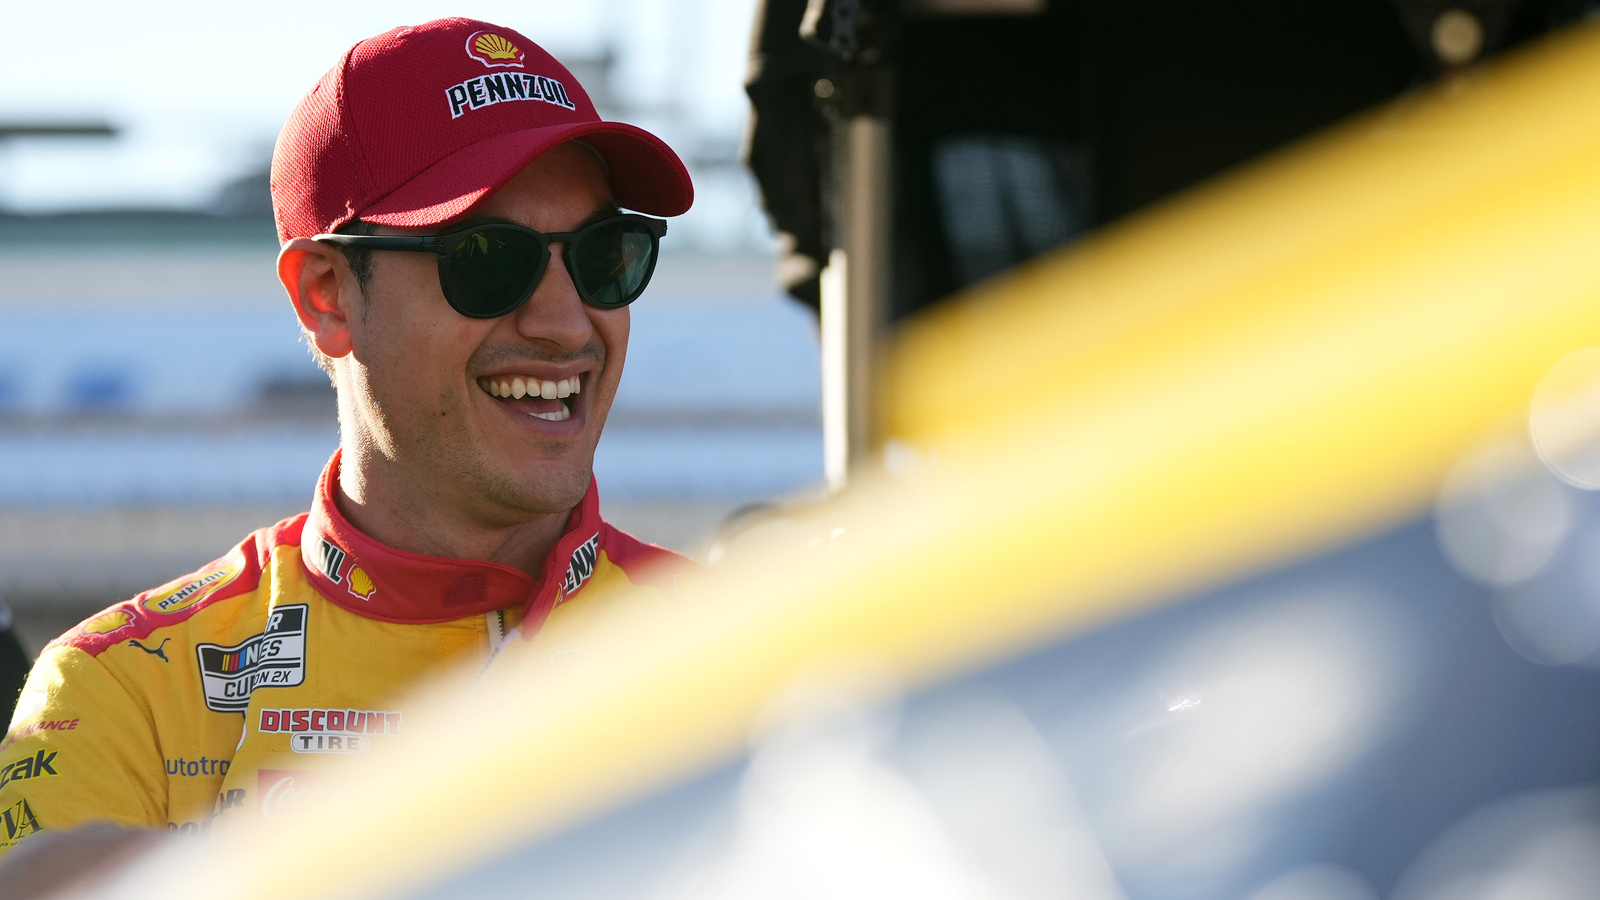 Joey Logano slides, hits the inside wall hard during practice at Homestead-Miami